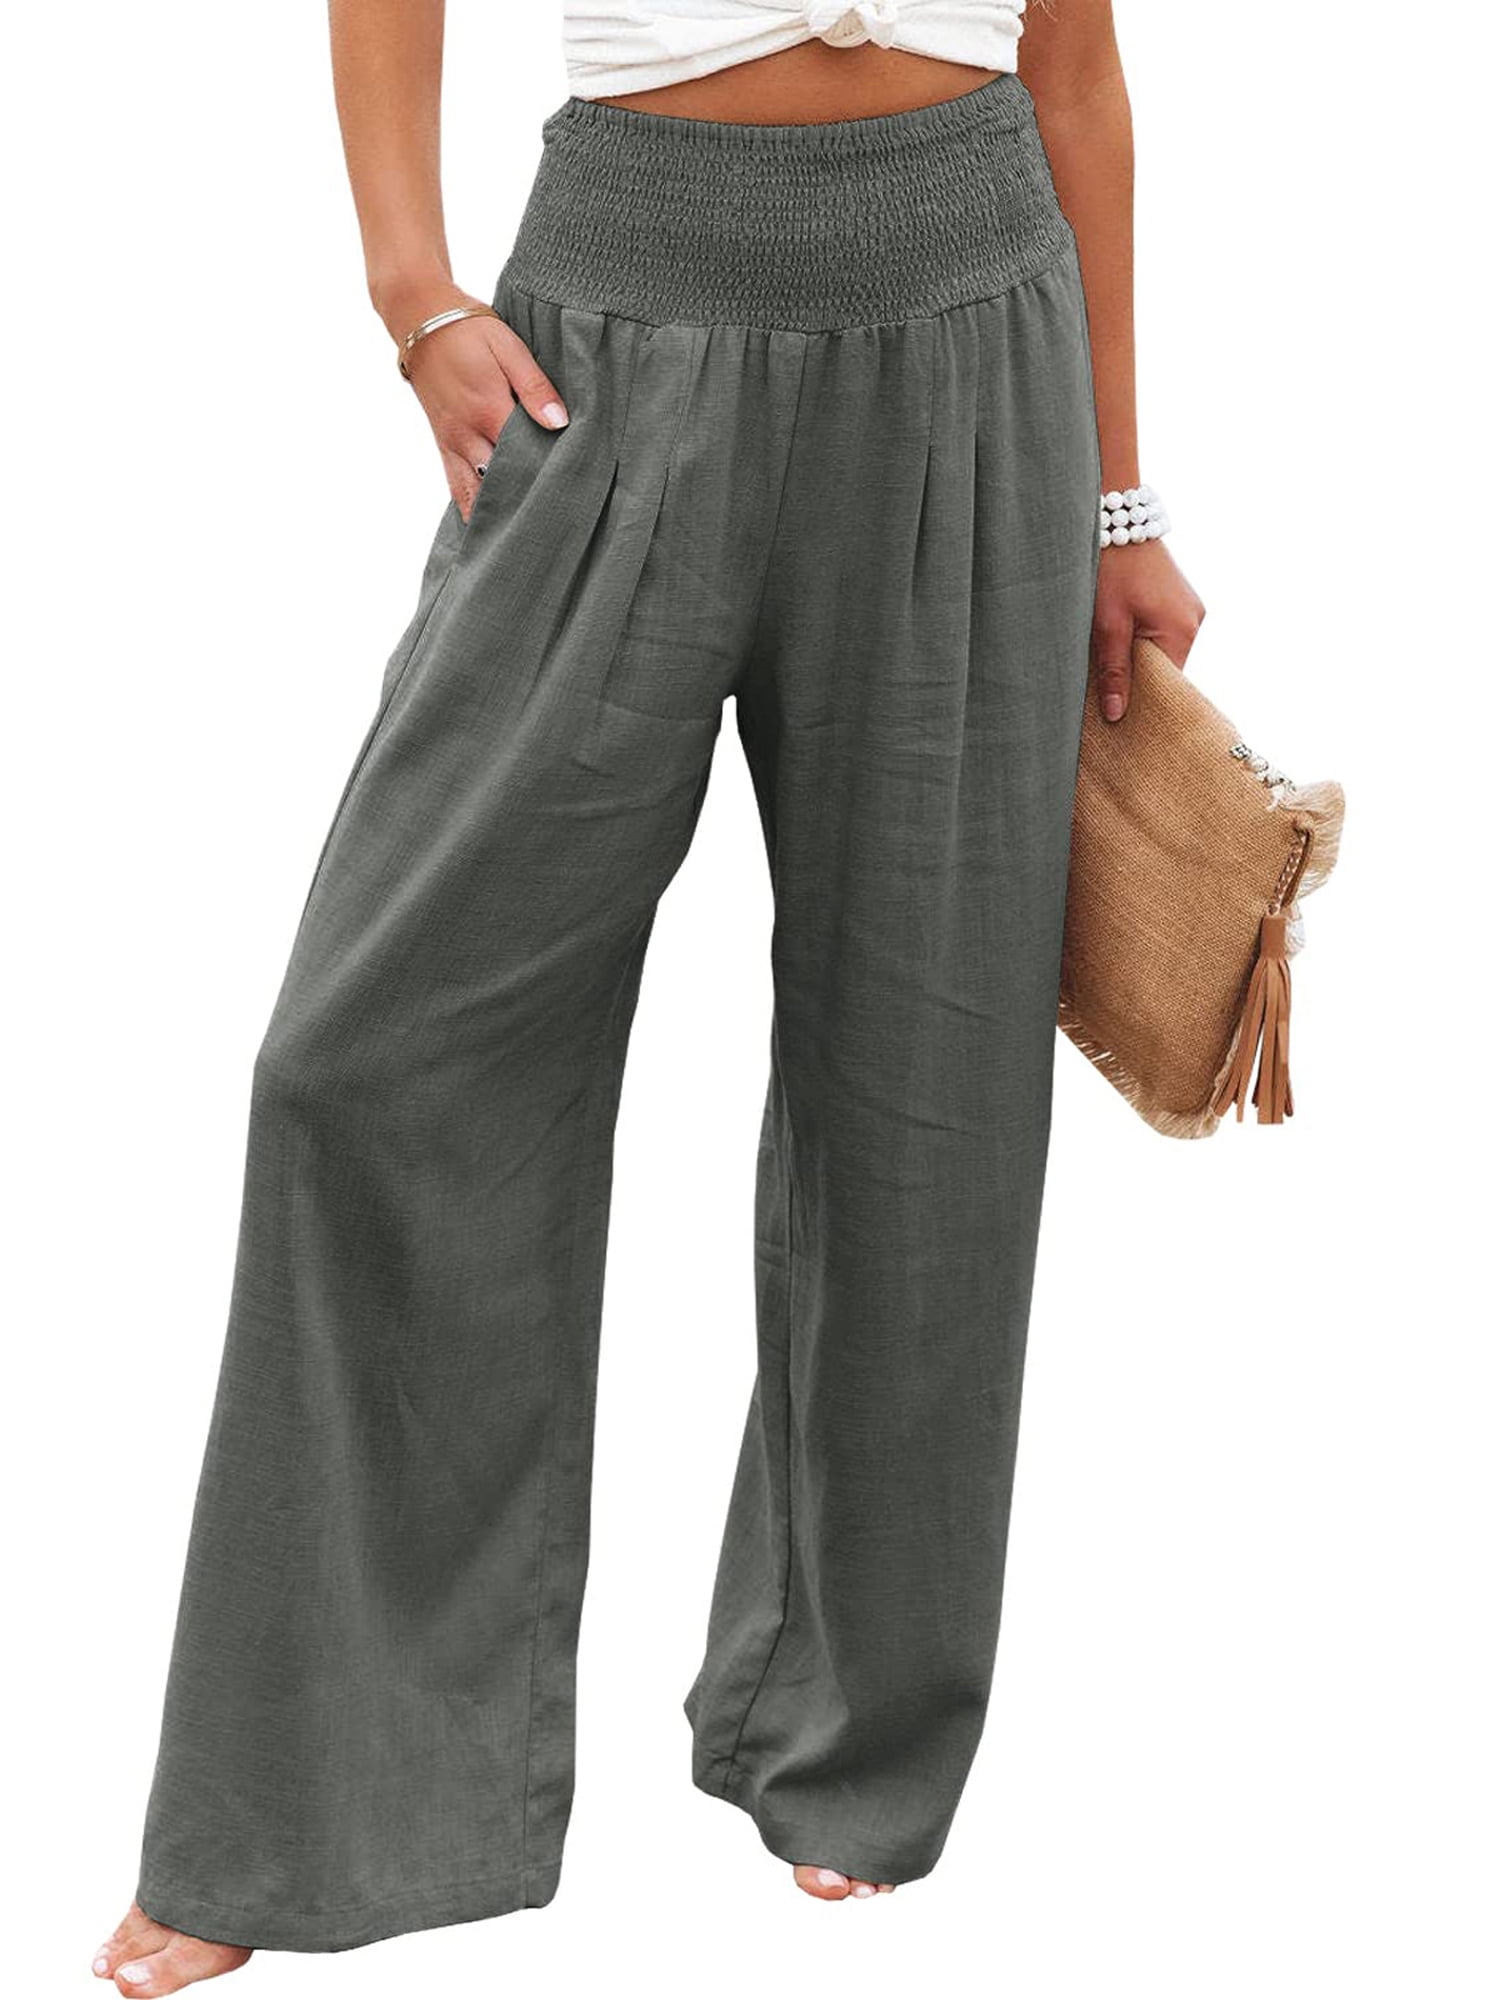  Muyise Womens Cotton Linen Casual Pants Straight Leg  Drawstring Elastic High Waist Loose Comfy Palazzo Trousers